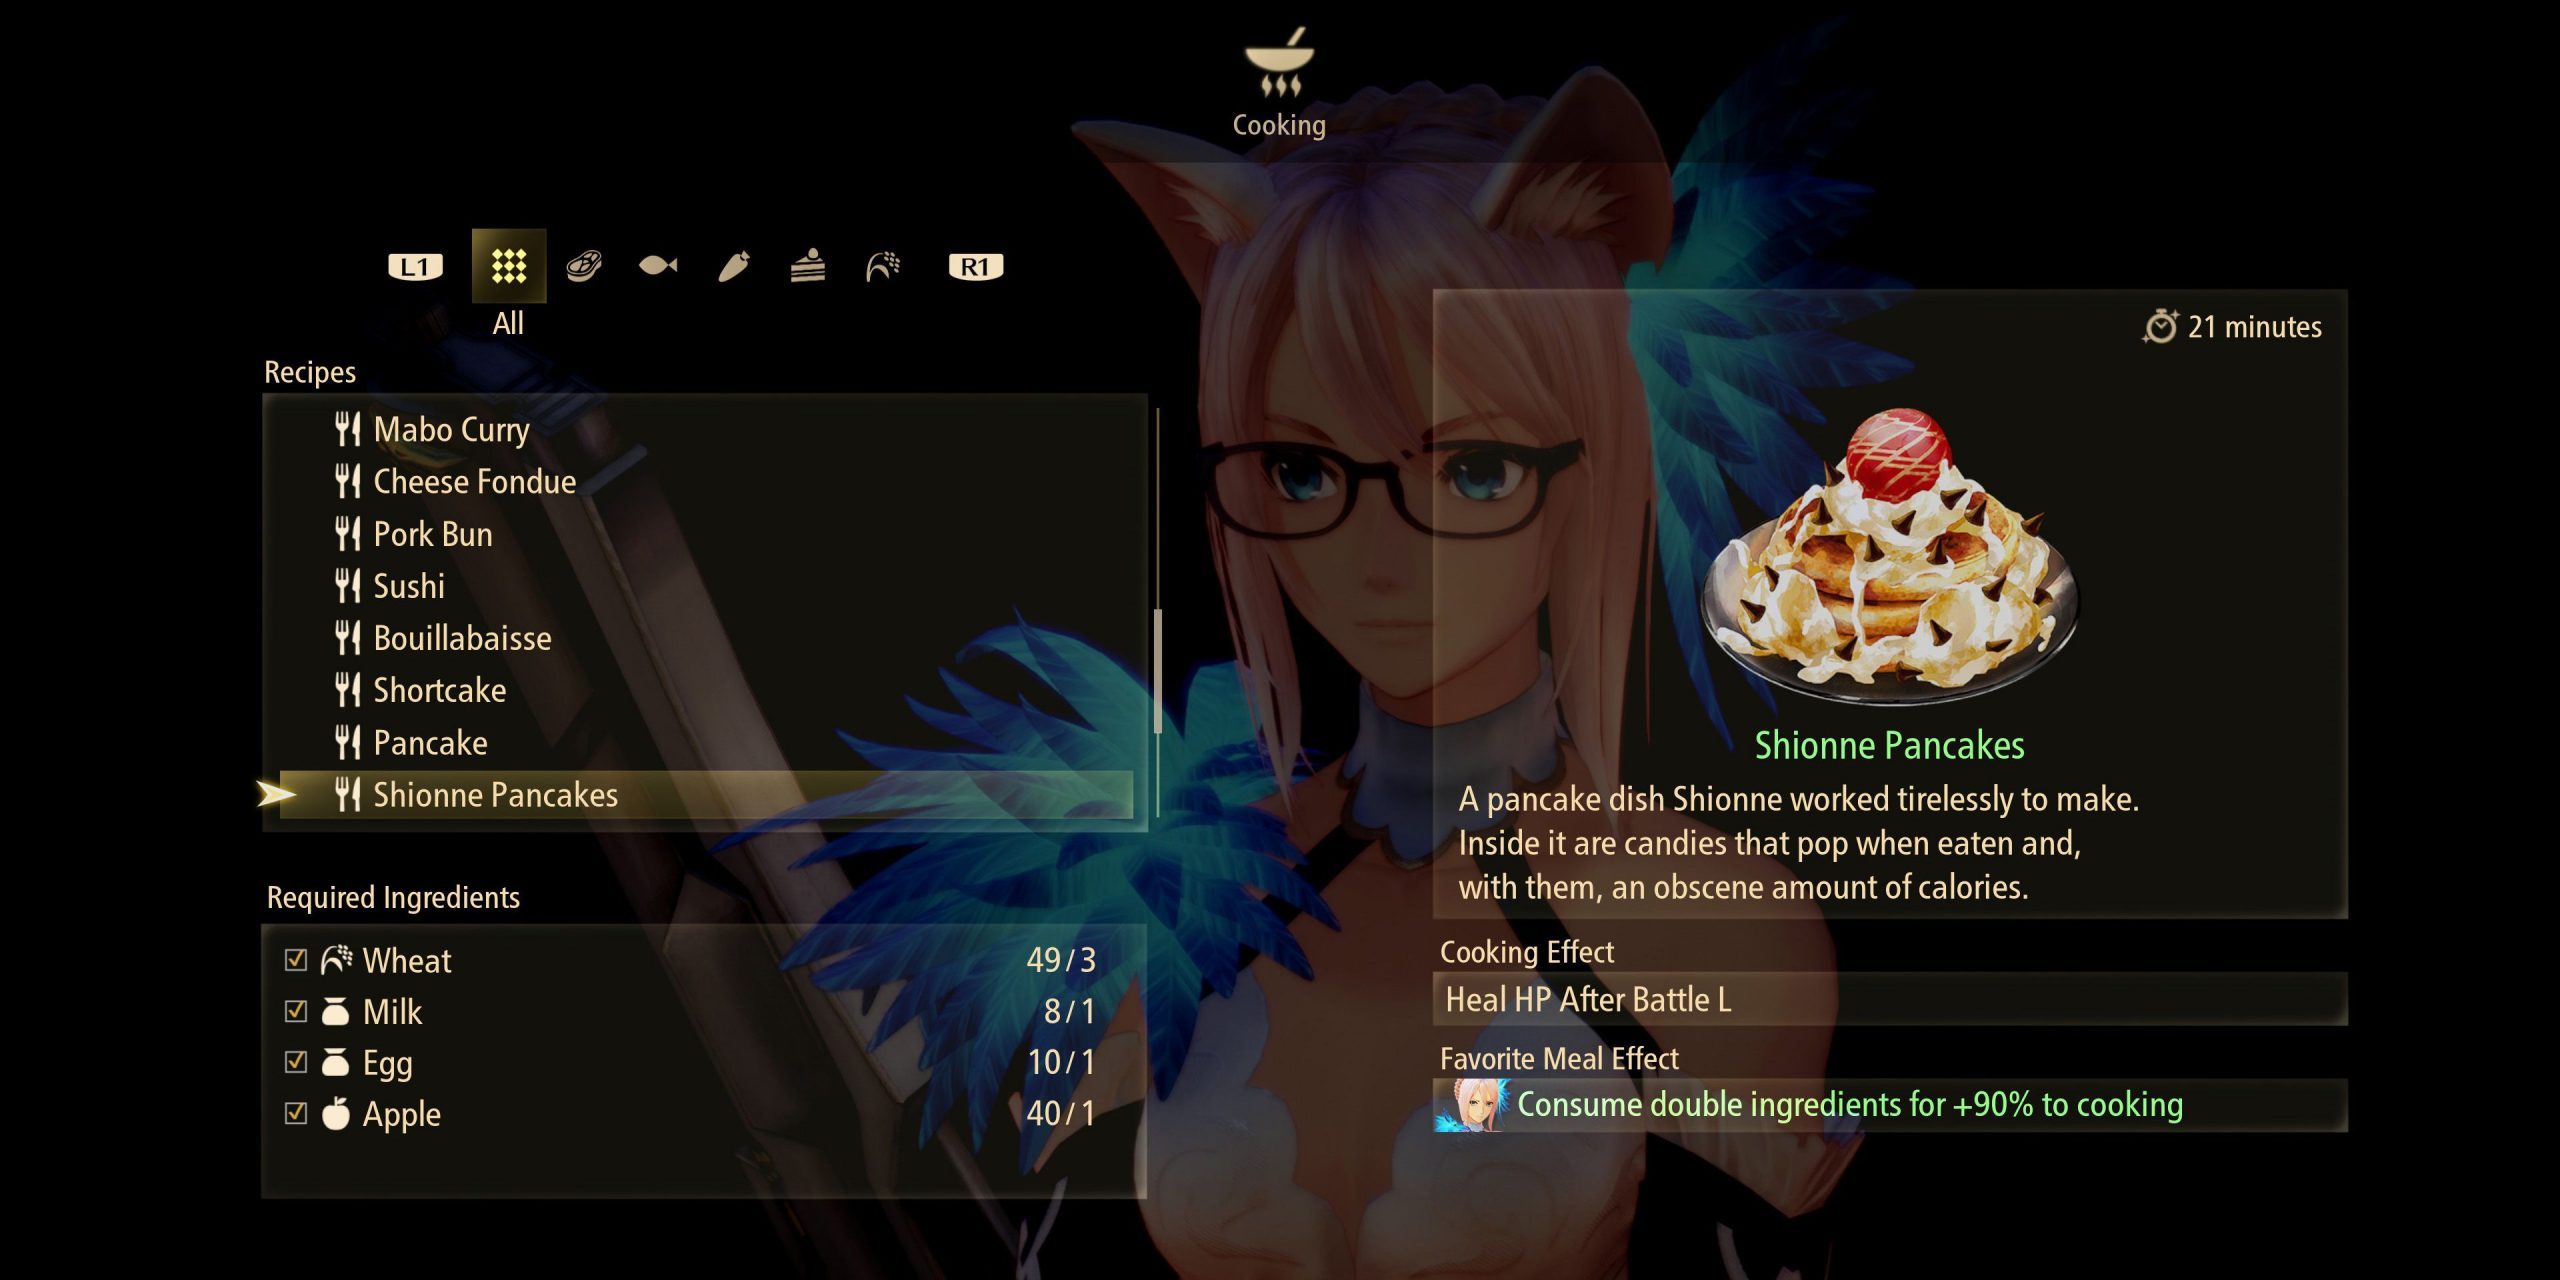 tales-of-arise-cooking-recipes-29-shionne-pancakes-8912463